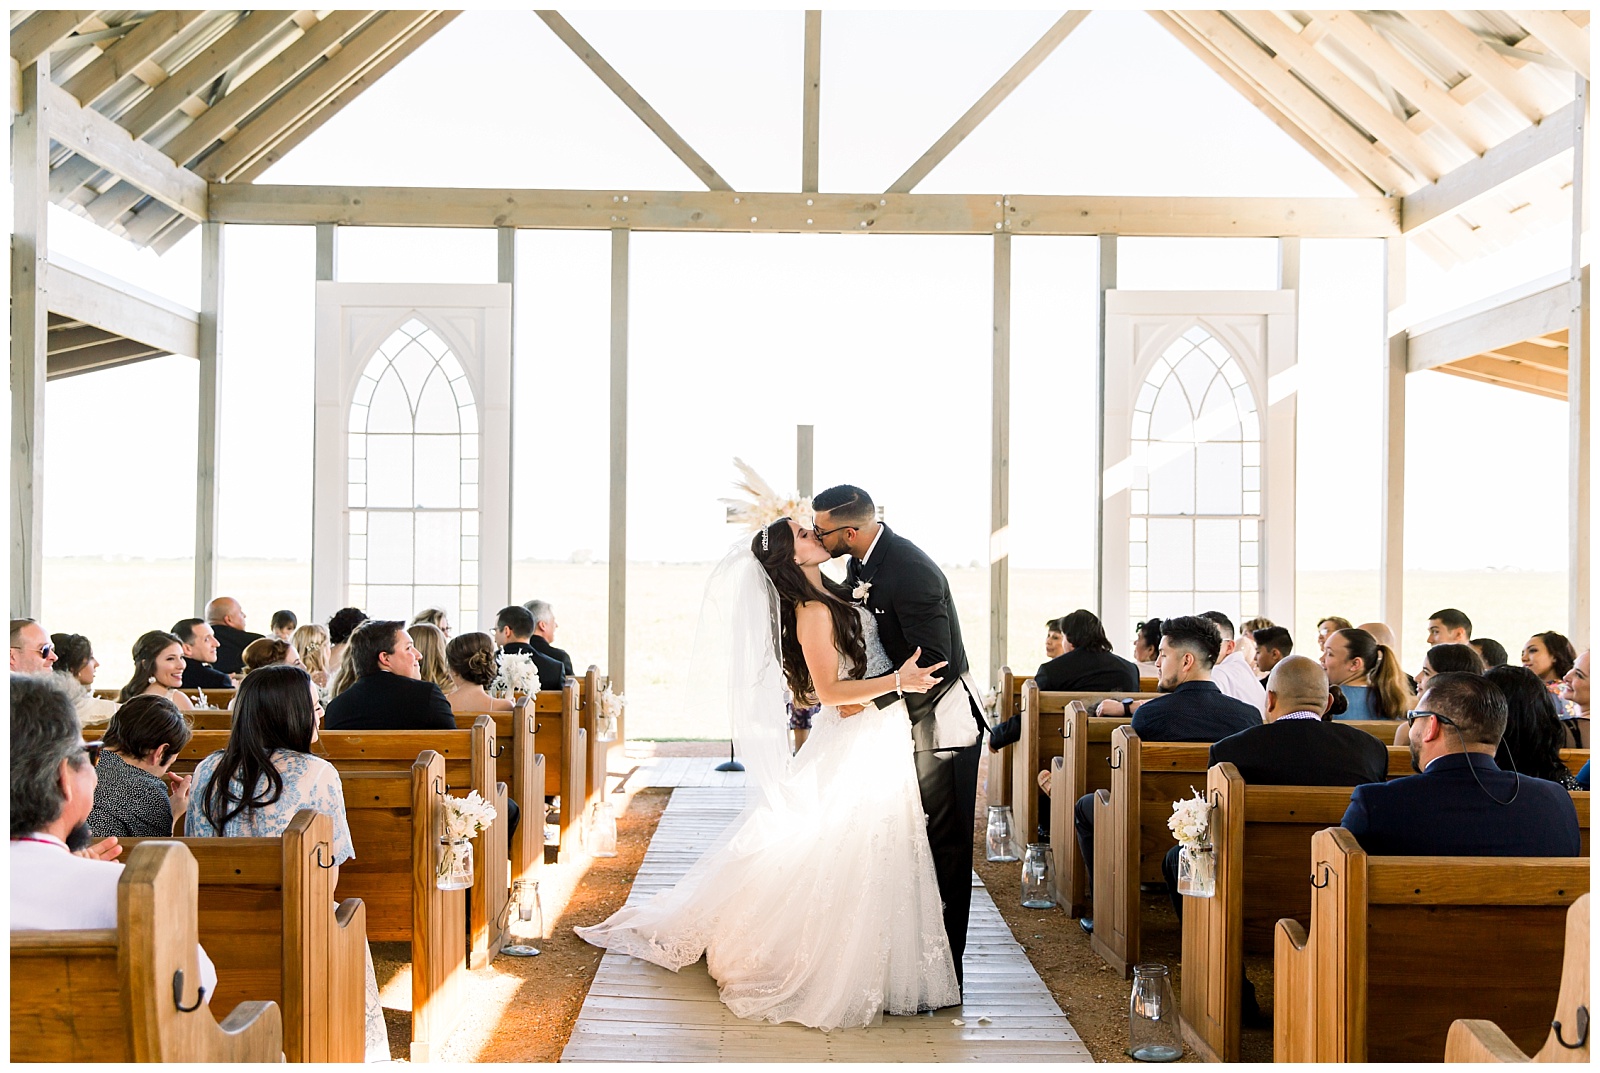 Gorgeous lighting with bride and groom kissing at alter at The Allen Farmhaus Wedding, TX by San Antonio-Maui-Destination Wedding Photographer | Monica Roberts Photography | www.monicaroberts.com